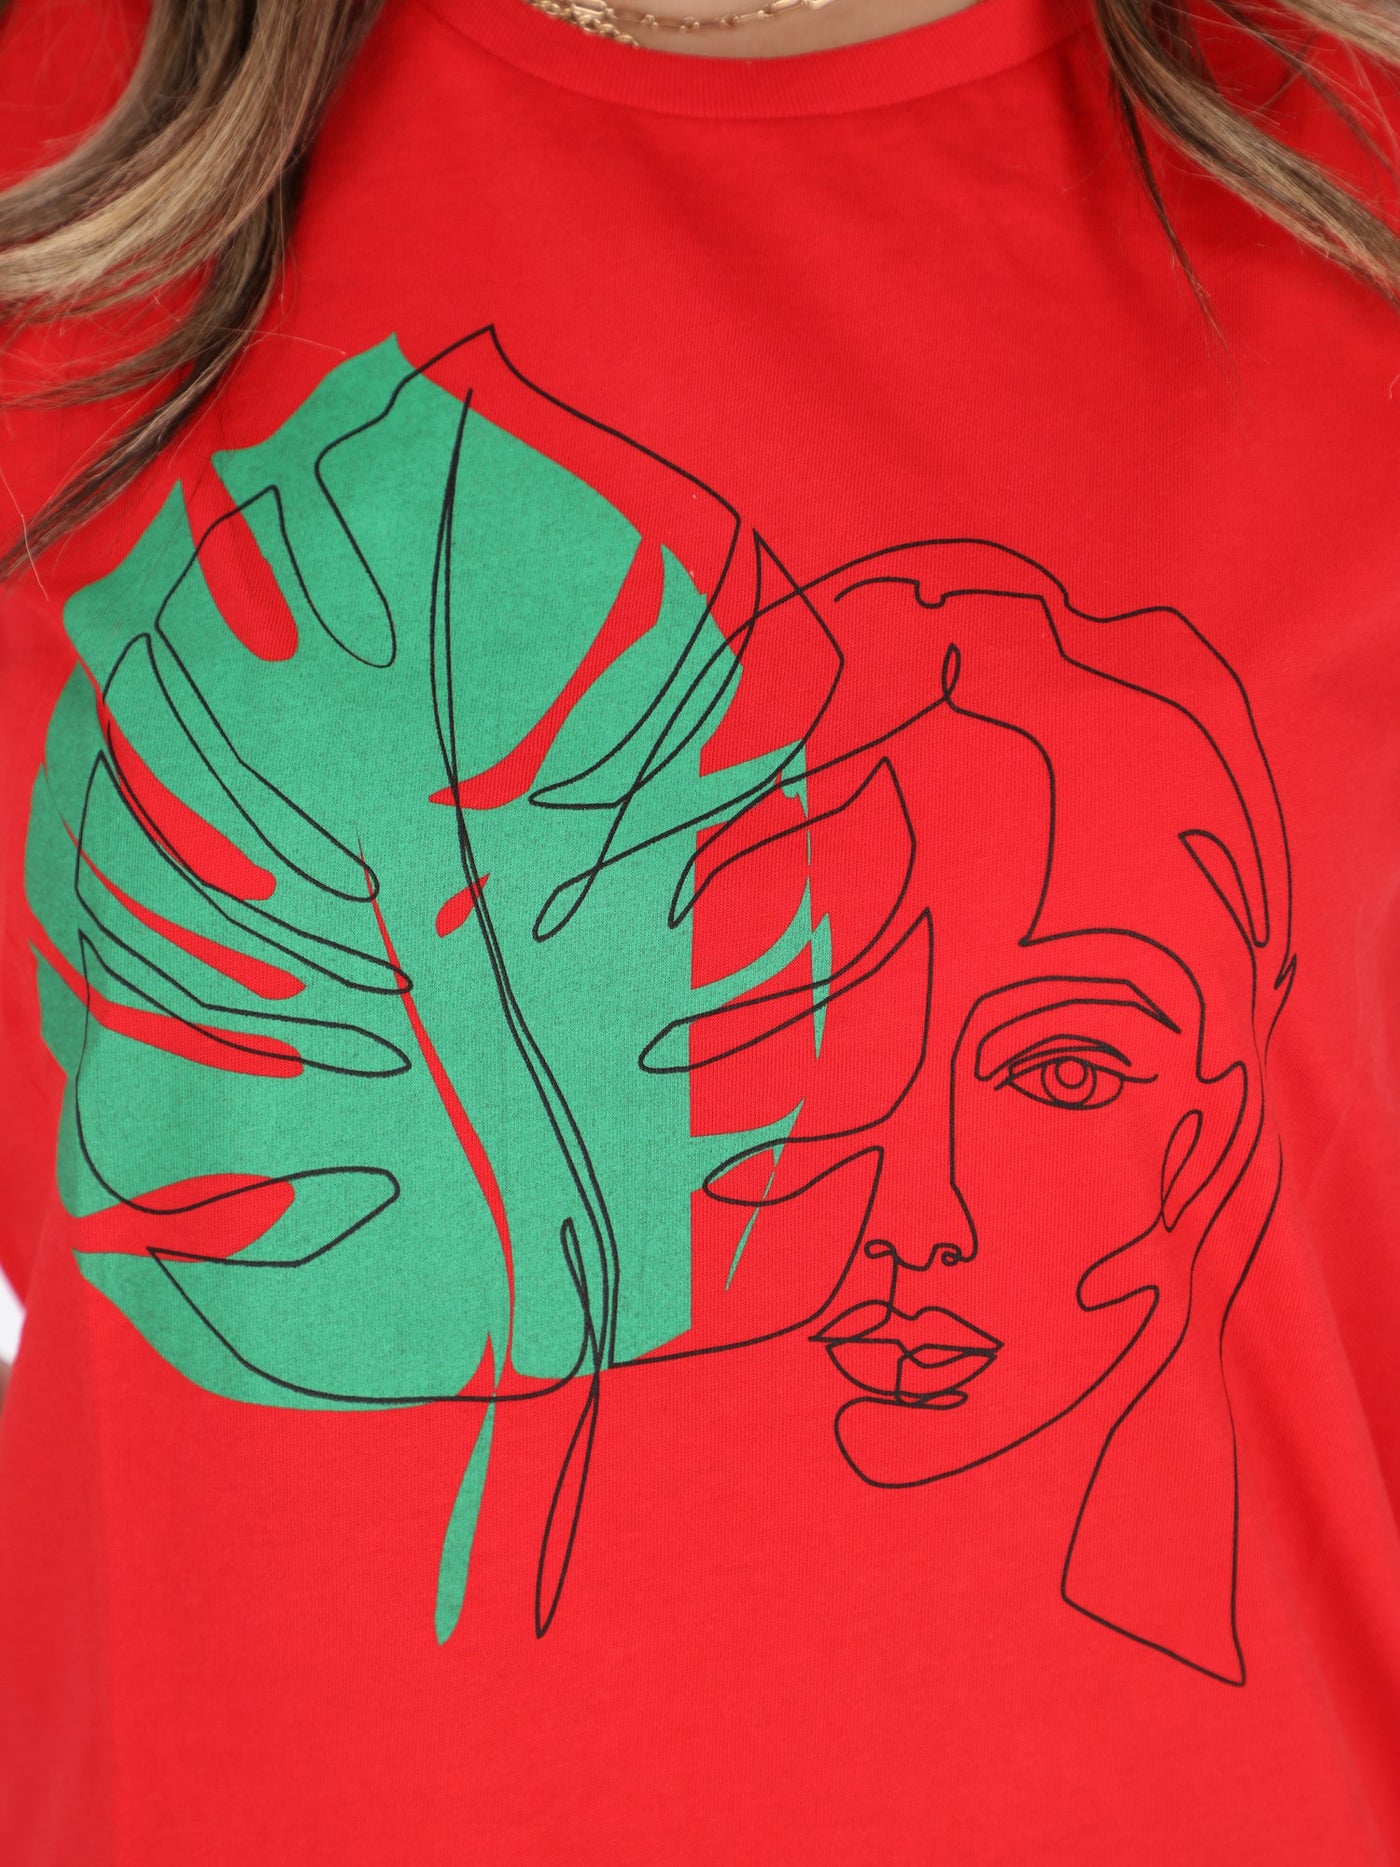 OR Women's Flower Abstract T-Shirt